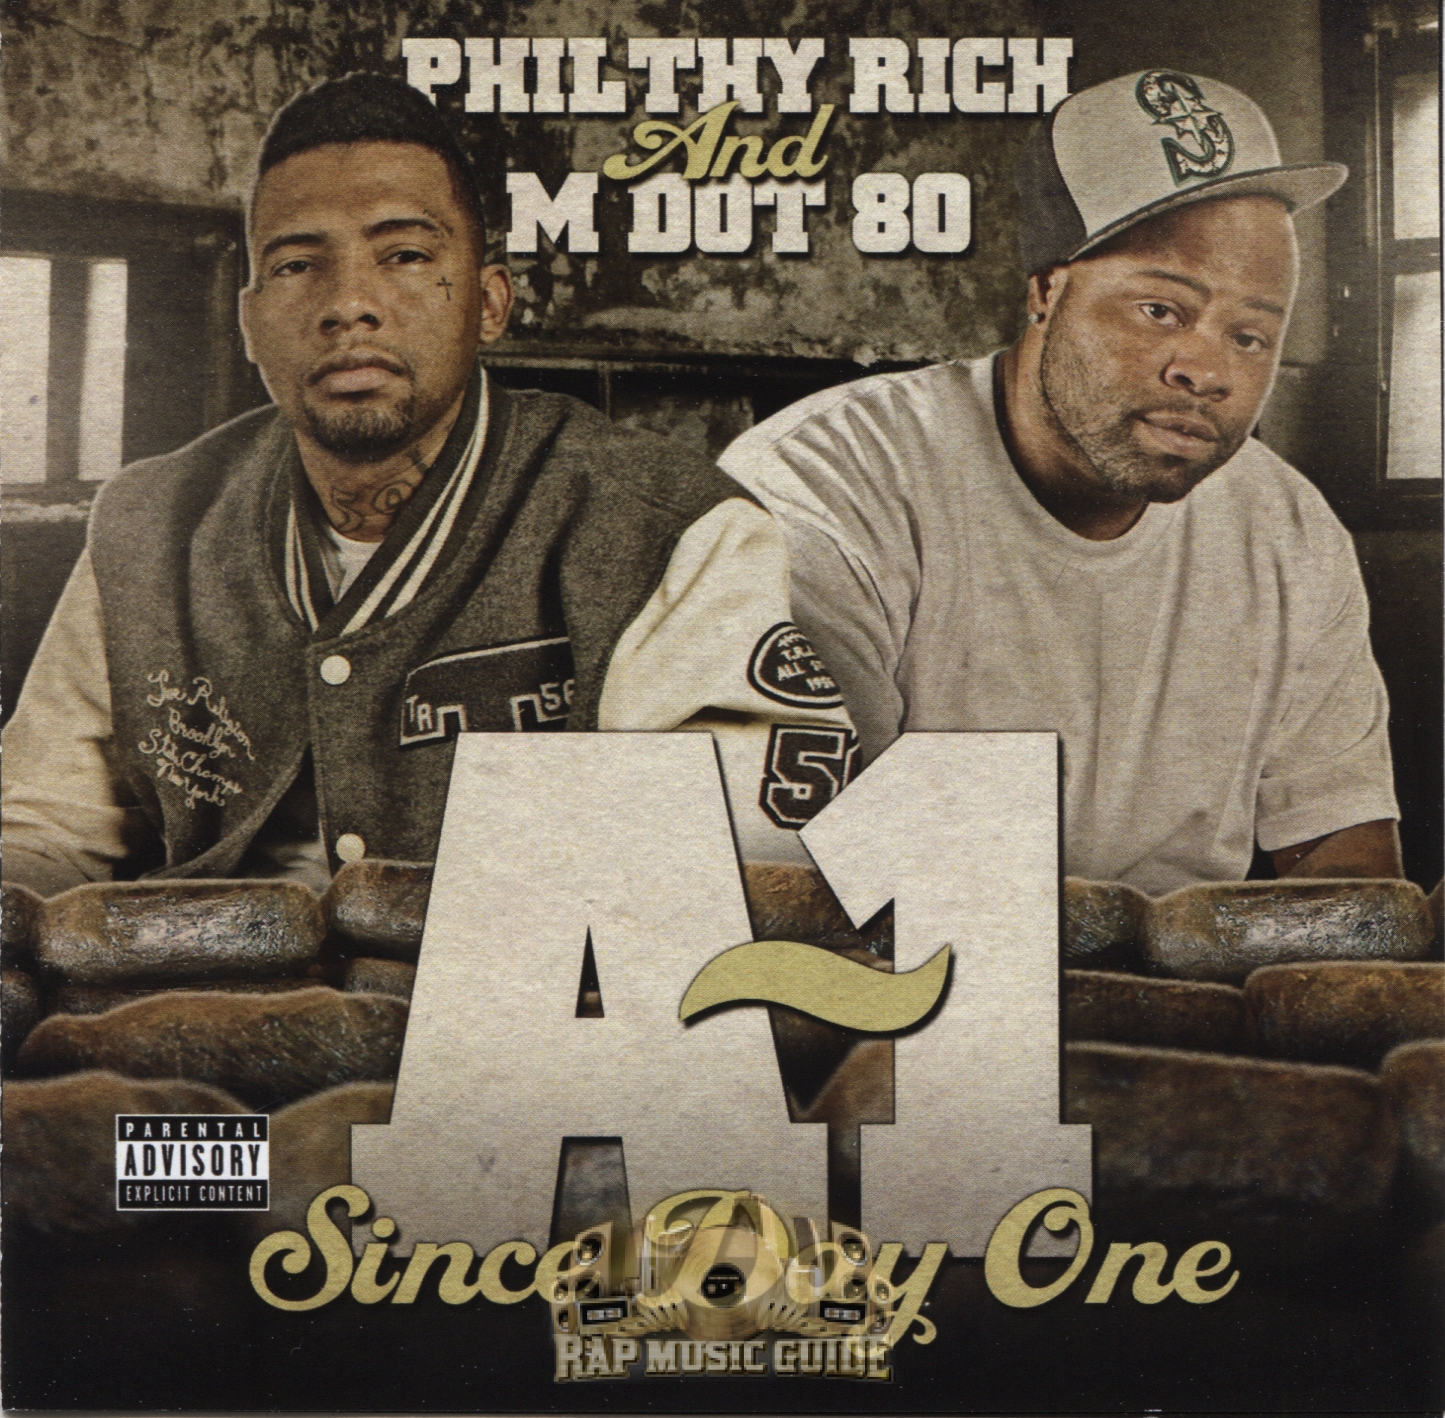 Philthy Rich & M Dot 80 - A~1 Since Day One: CD | Rap Music Guide